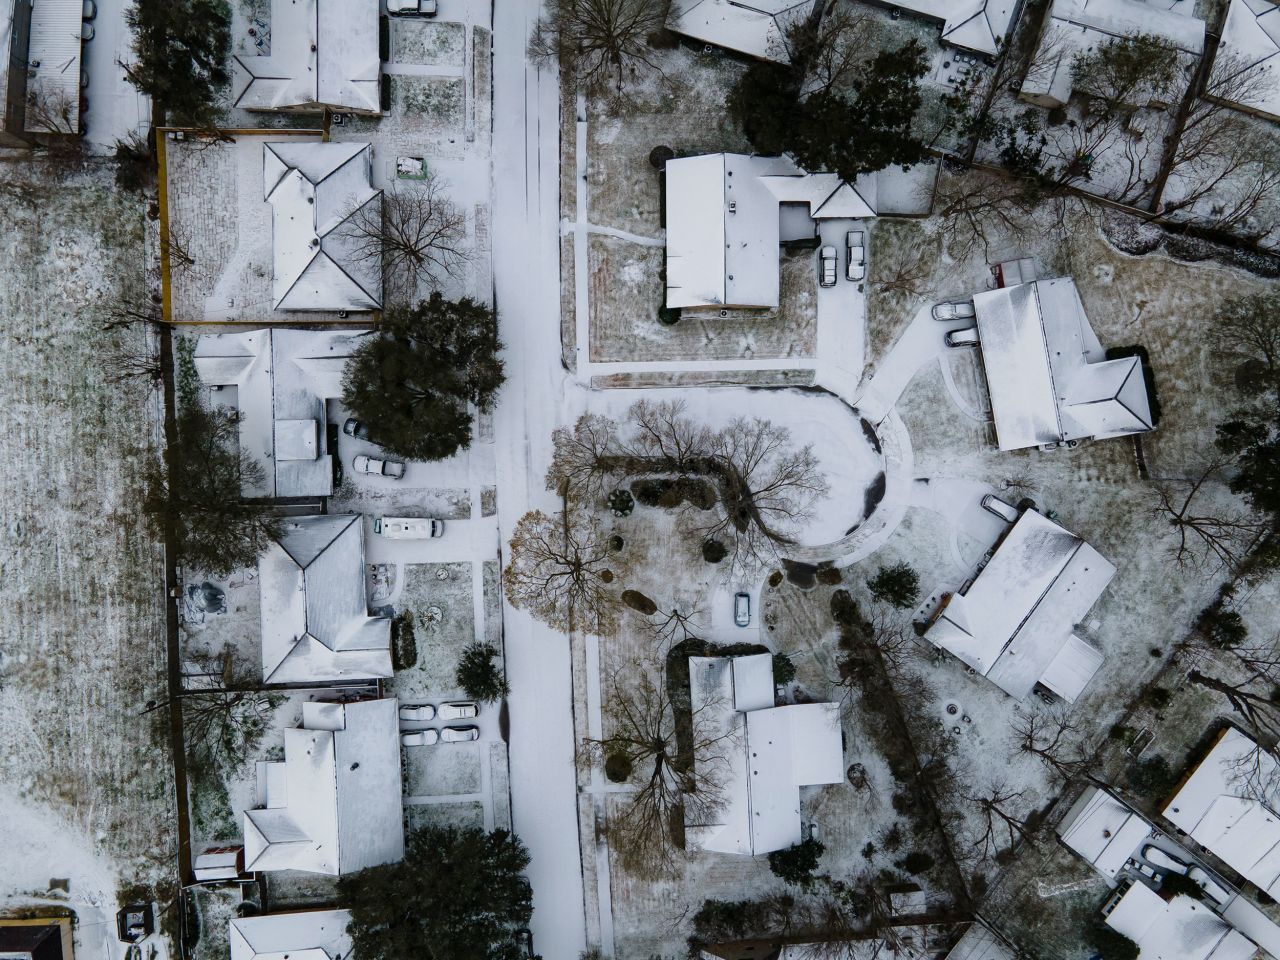 Homes in the Westbury neighborhood of Houston are covered in snow on Monday, February 15.